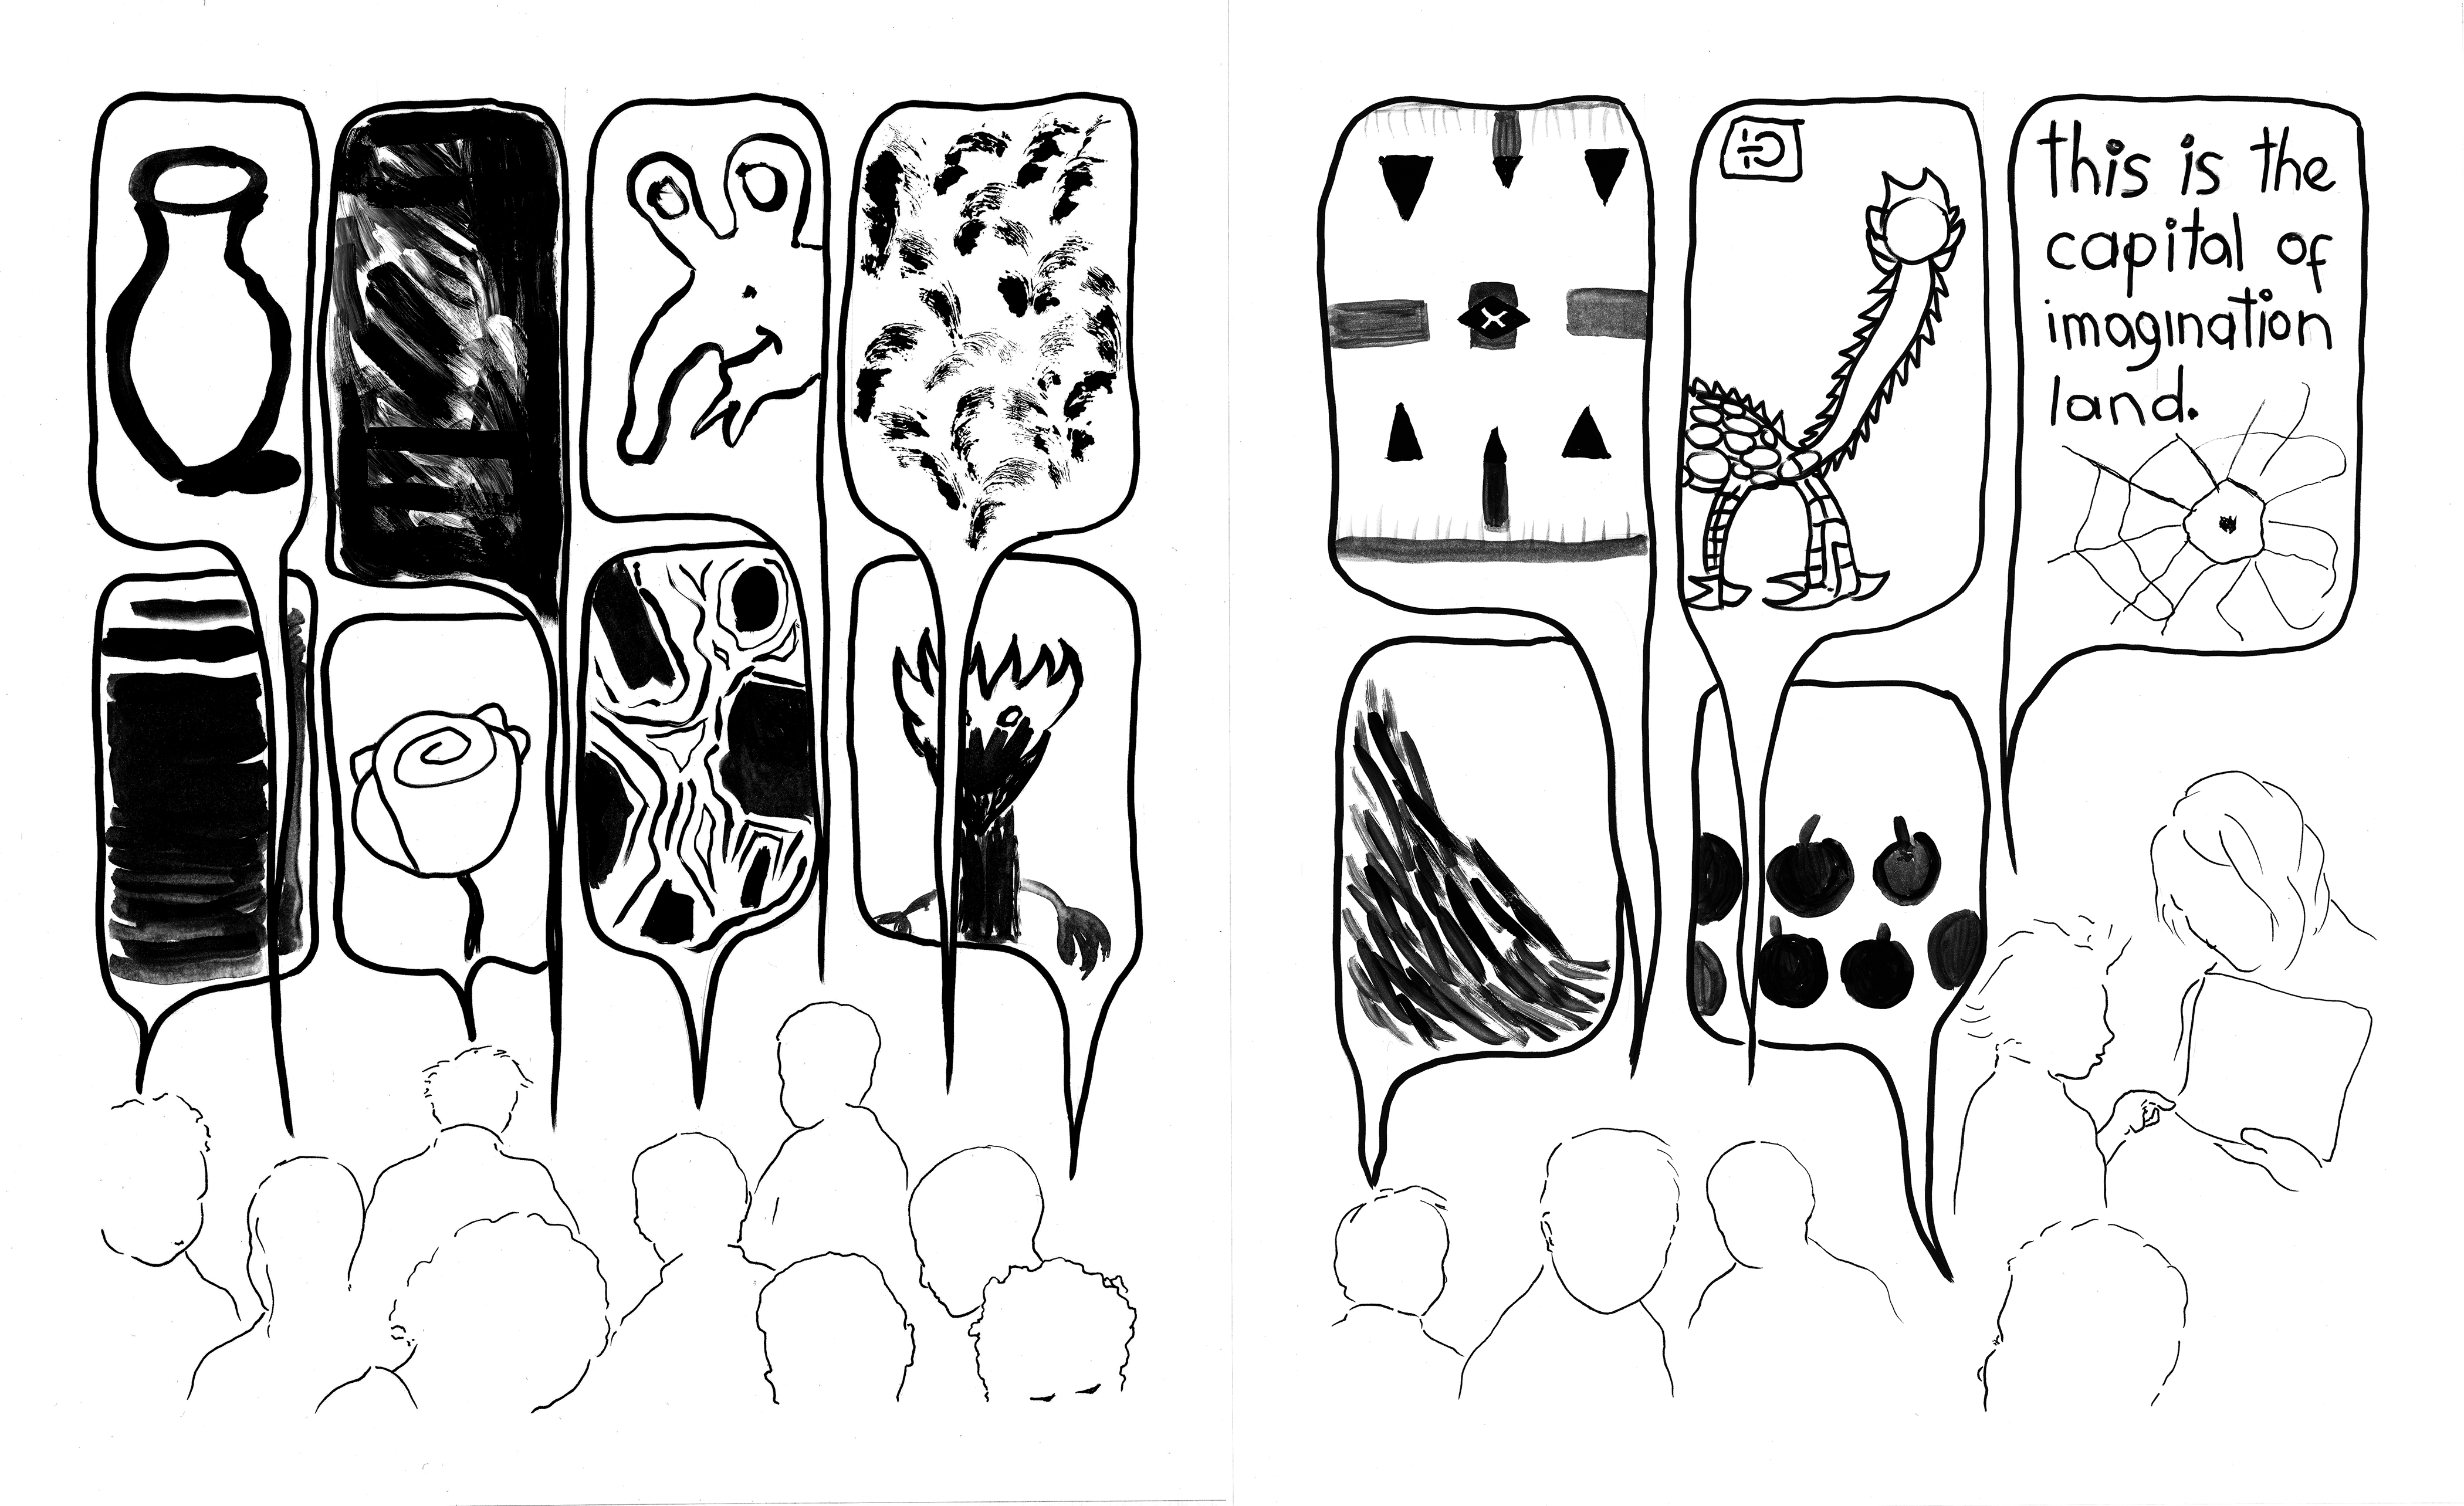 This is a two-page spread, together showing a continuous scene, with black drawings against a white background. Toward the bottom of the frame are outlines of several children’s heads, with their thought bubbles taking up most of each page. The thought bubbles depict a range of images with varying levels of detail. Some are concrete and perhaps recognizable images (such as a vase, a rose, fruits, alien- and dragon-like creatures, a cartoon character) and others are abstract (a swirl of black, layered stripes, gestural dabs, a set of symmetrically arranged marks, a slope of dash marks, an asymmetrical lined shape stretching within its bubble). The last thought bubble is connected to a child standing next to an adult and pointing at a paper; the thought bubble shows a spider web and includes the words “this is the capital of imagination land” in a child’s handwriting.